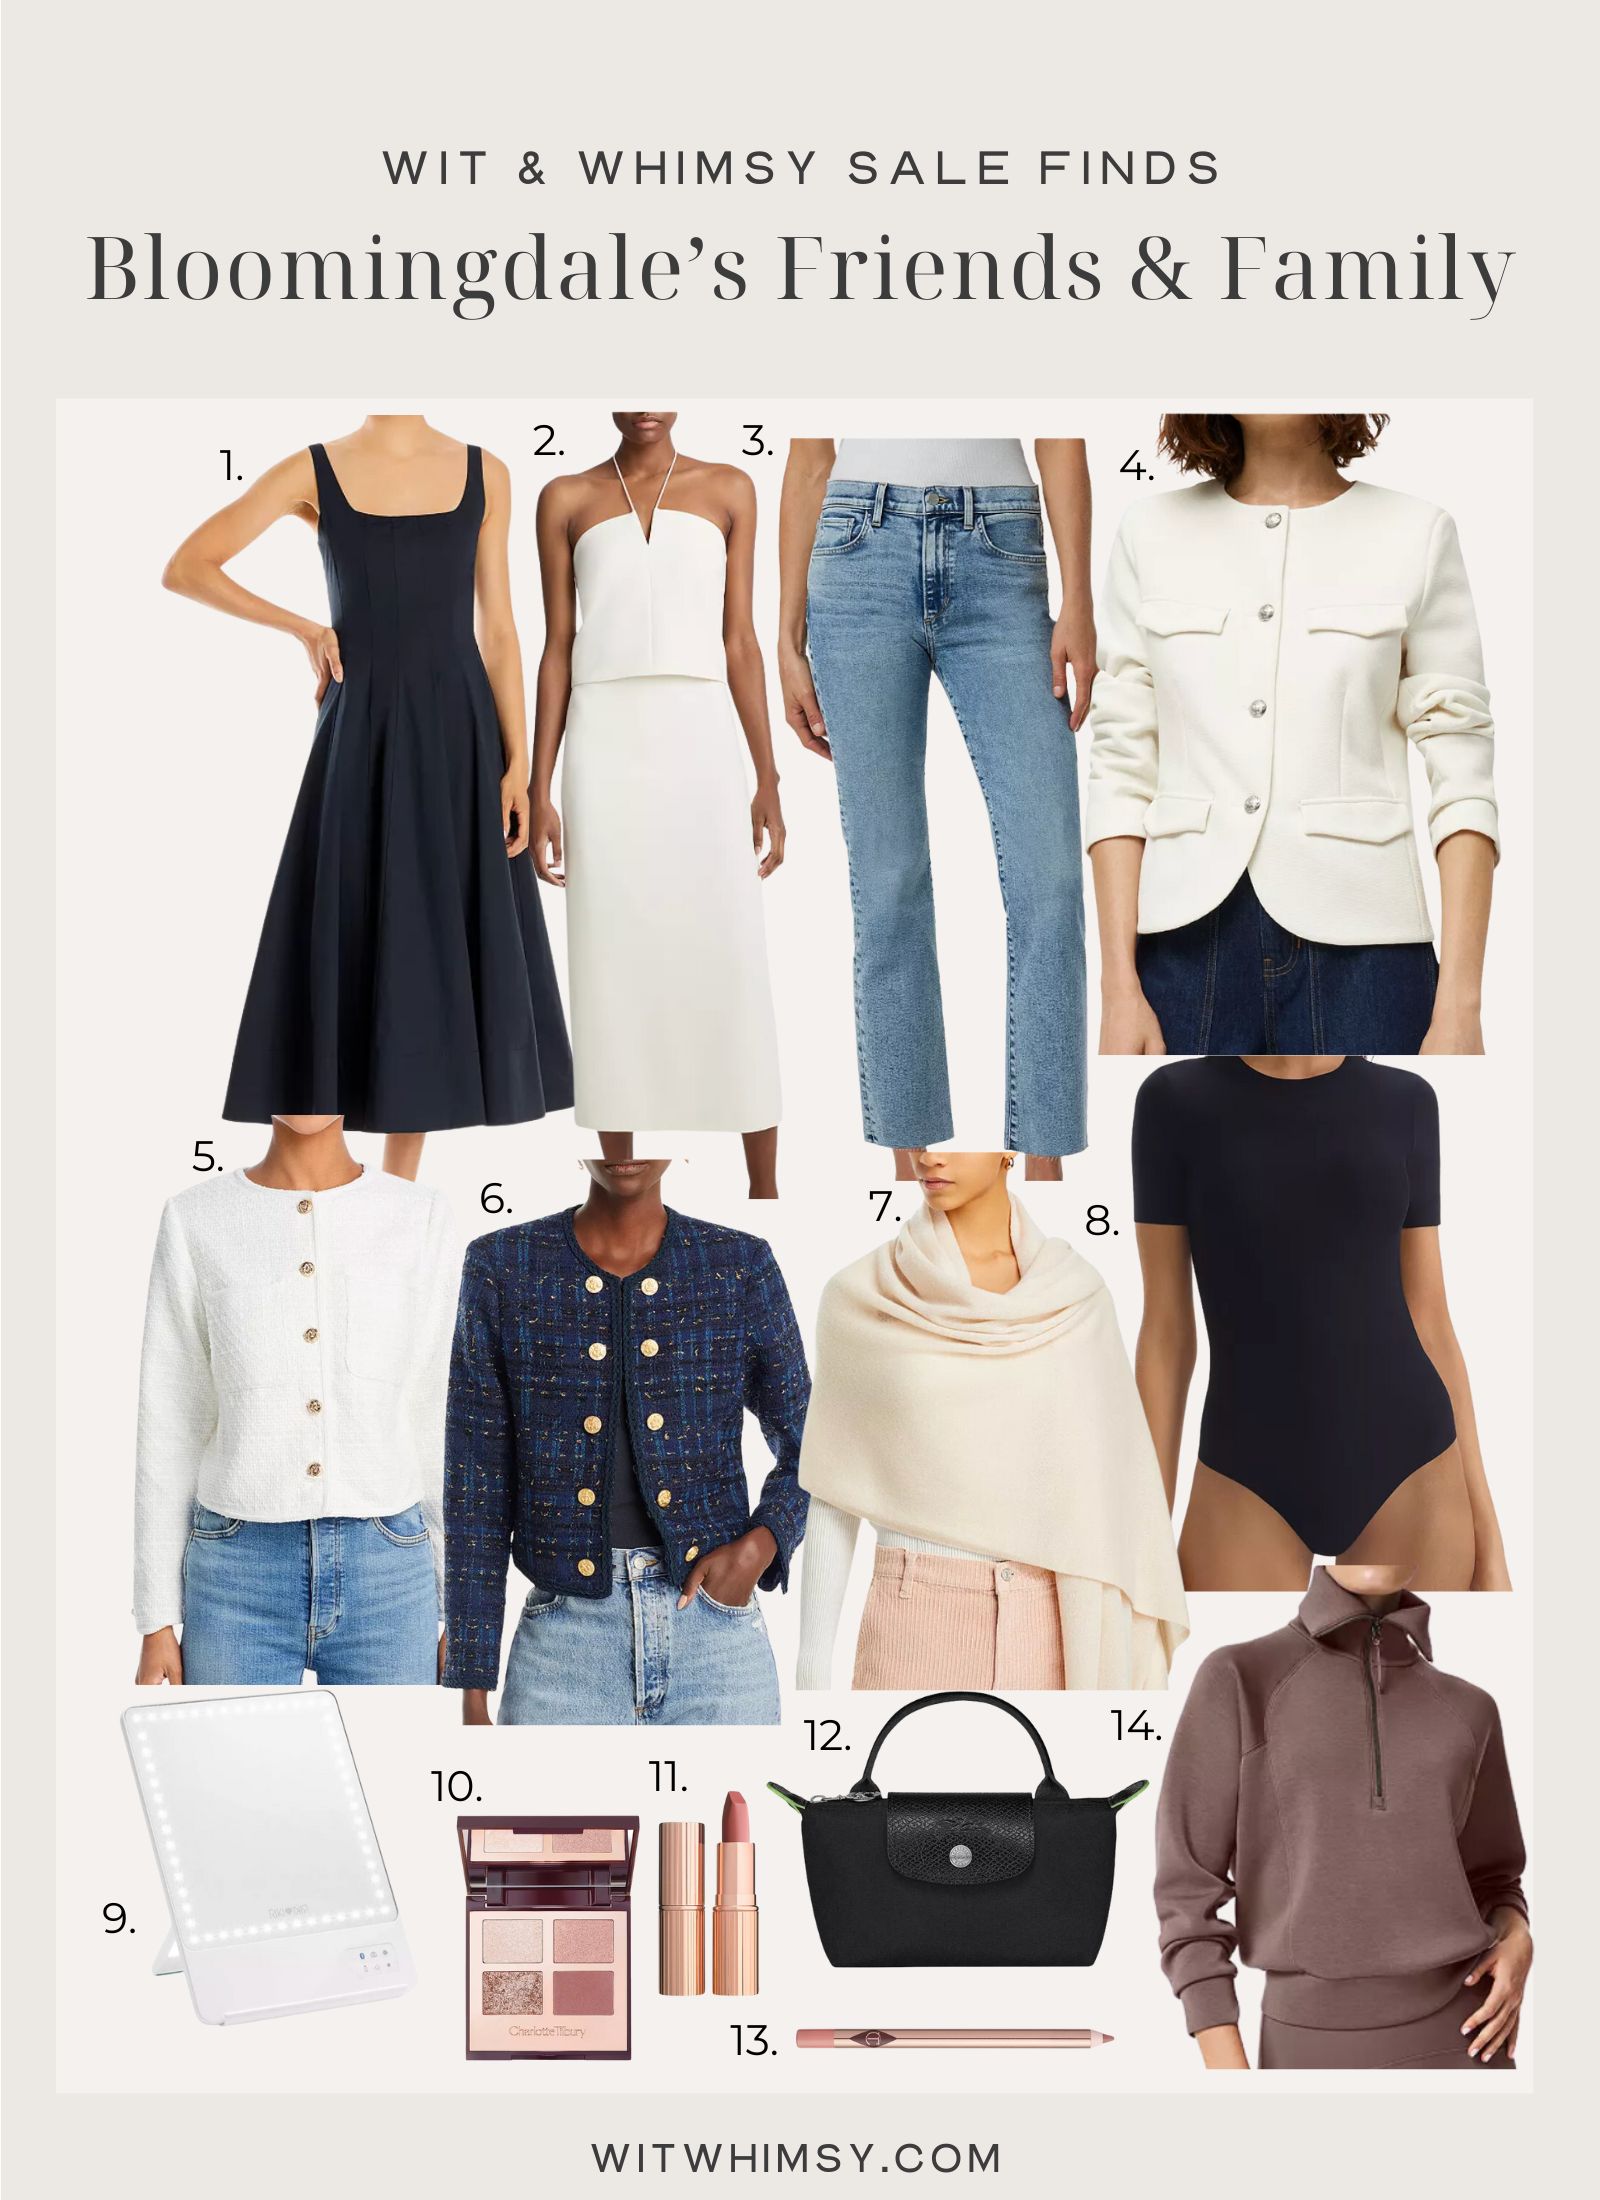 Denim Trends for Spring: 2 Must Have Jeans from Bloomingdales